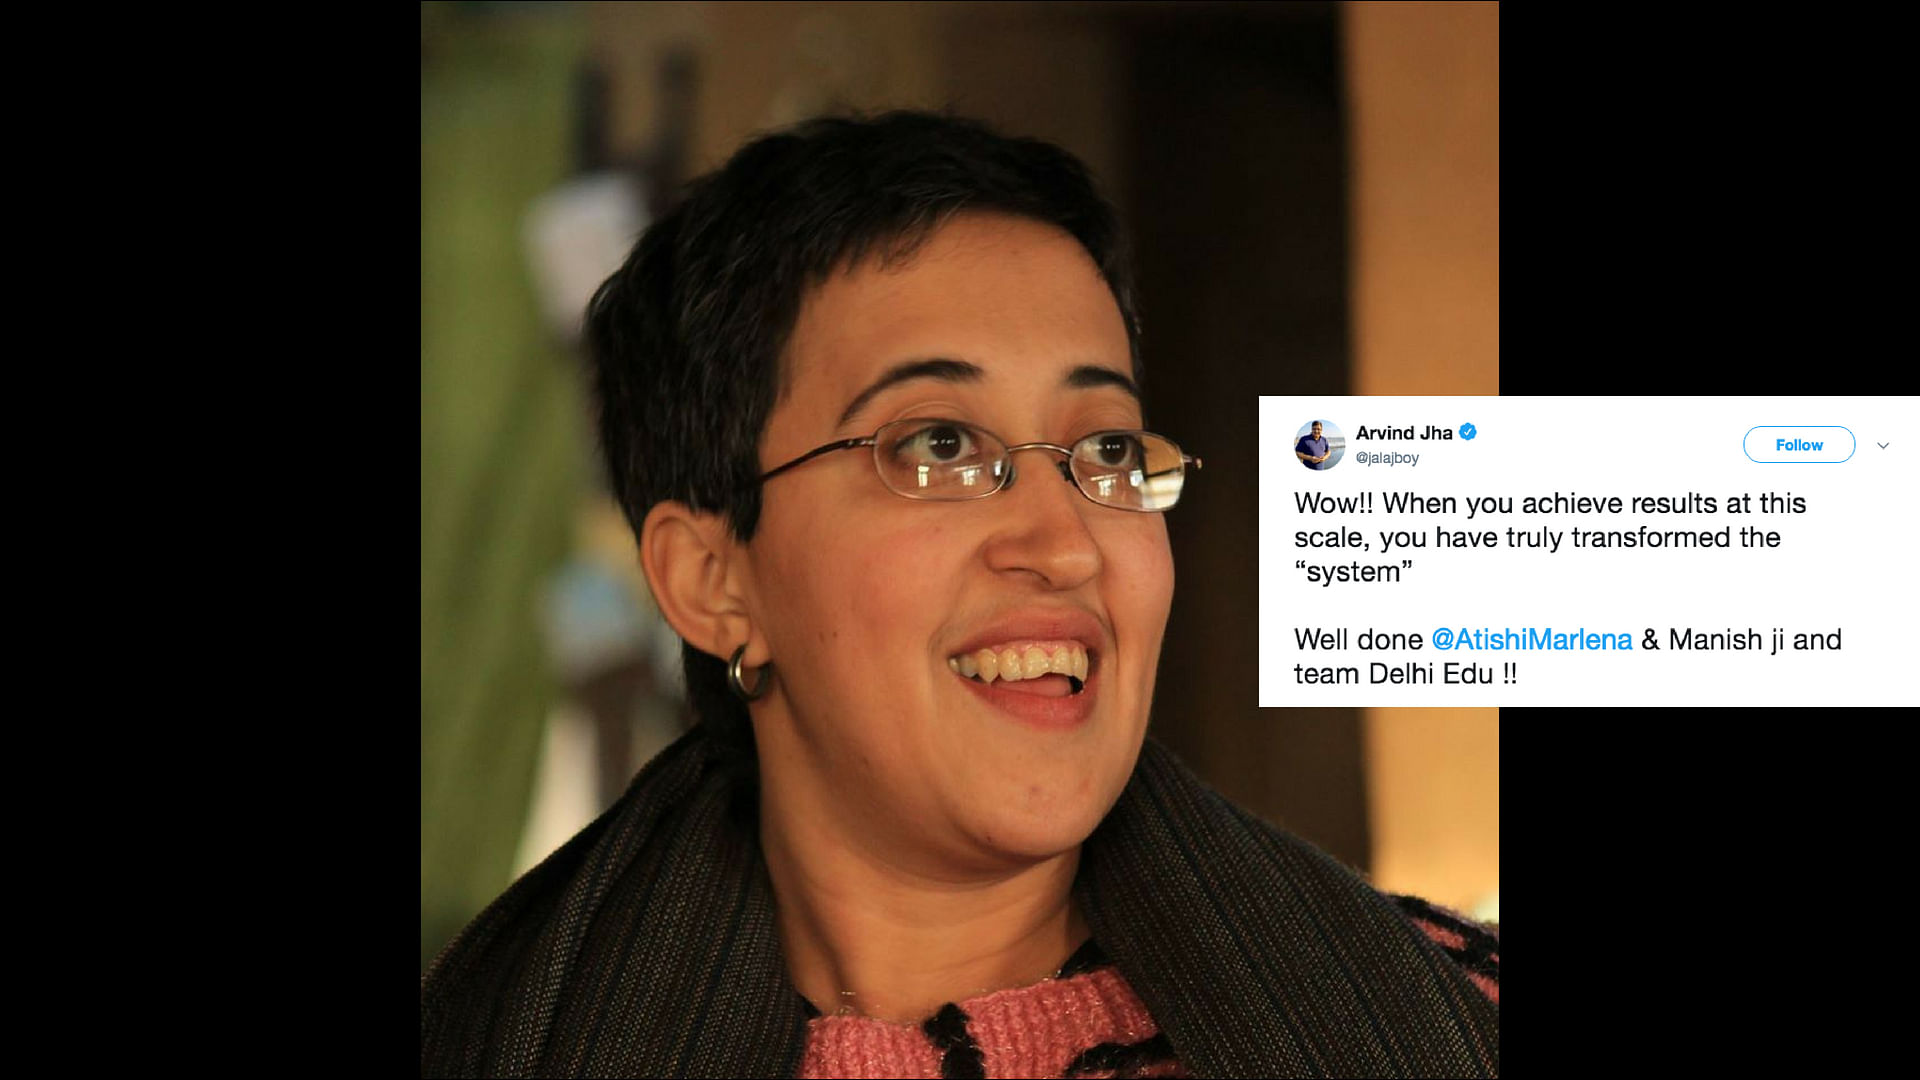 Atishi Marlena’s appointment as advisor to Manish Sisodia was cancelled at the insistence of the Centre in April.